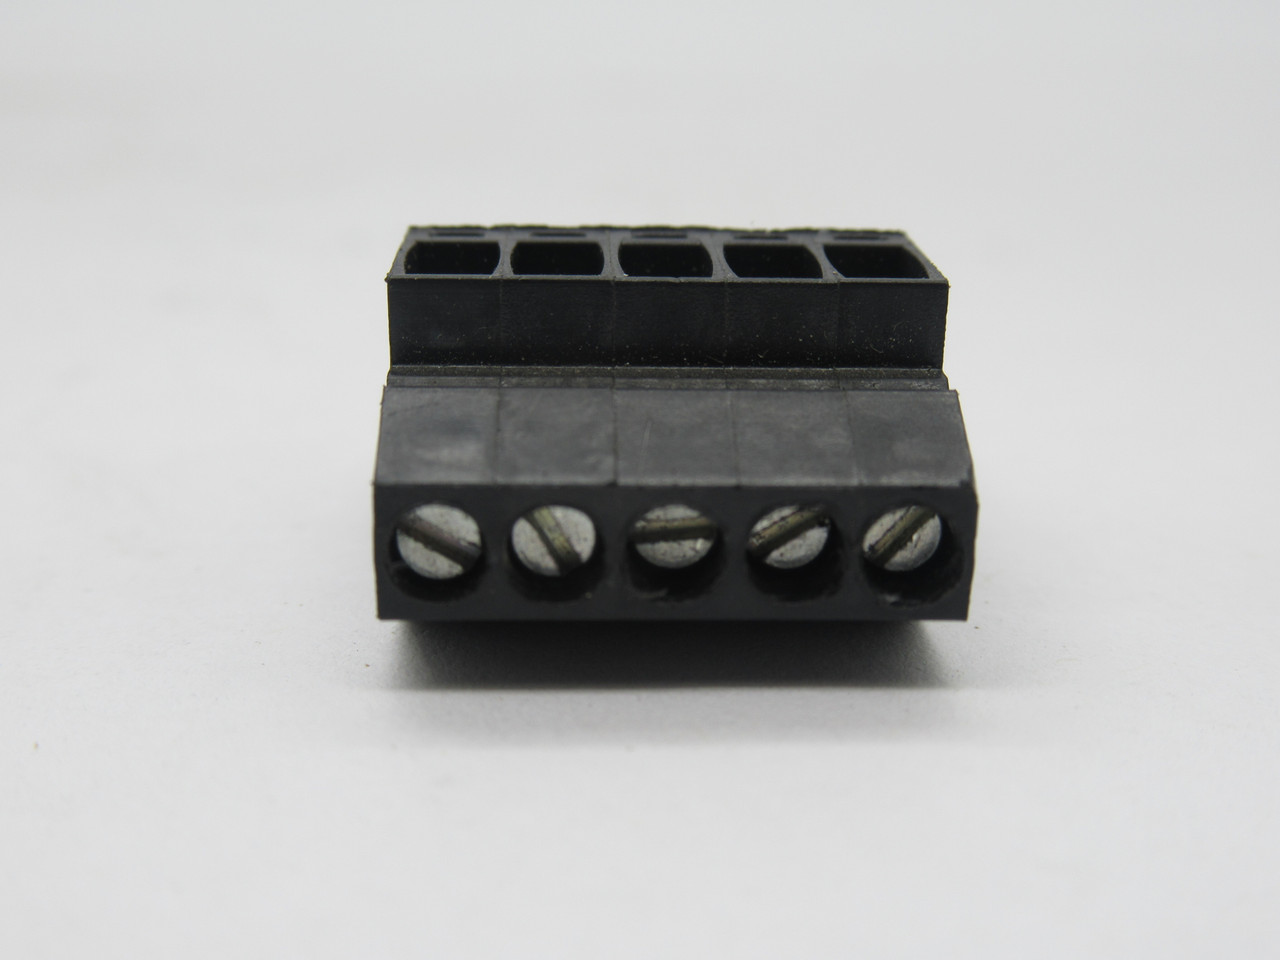 Weidmuller BL3.5/5 Pluggable Terminal Block 5-Positions 125V USED